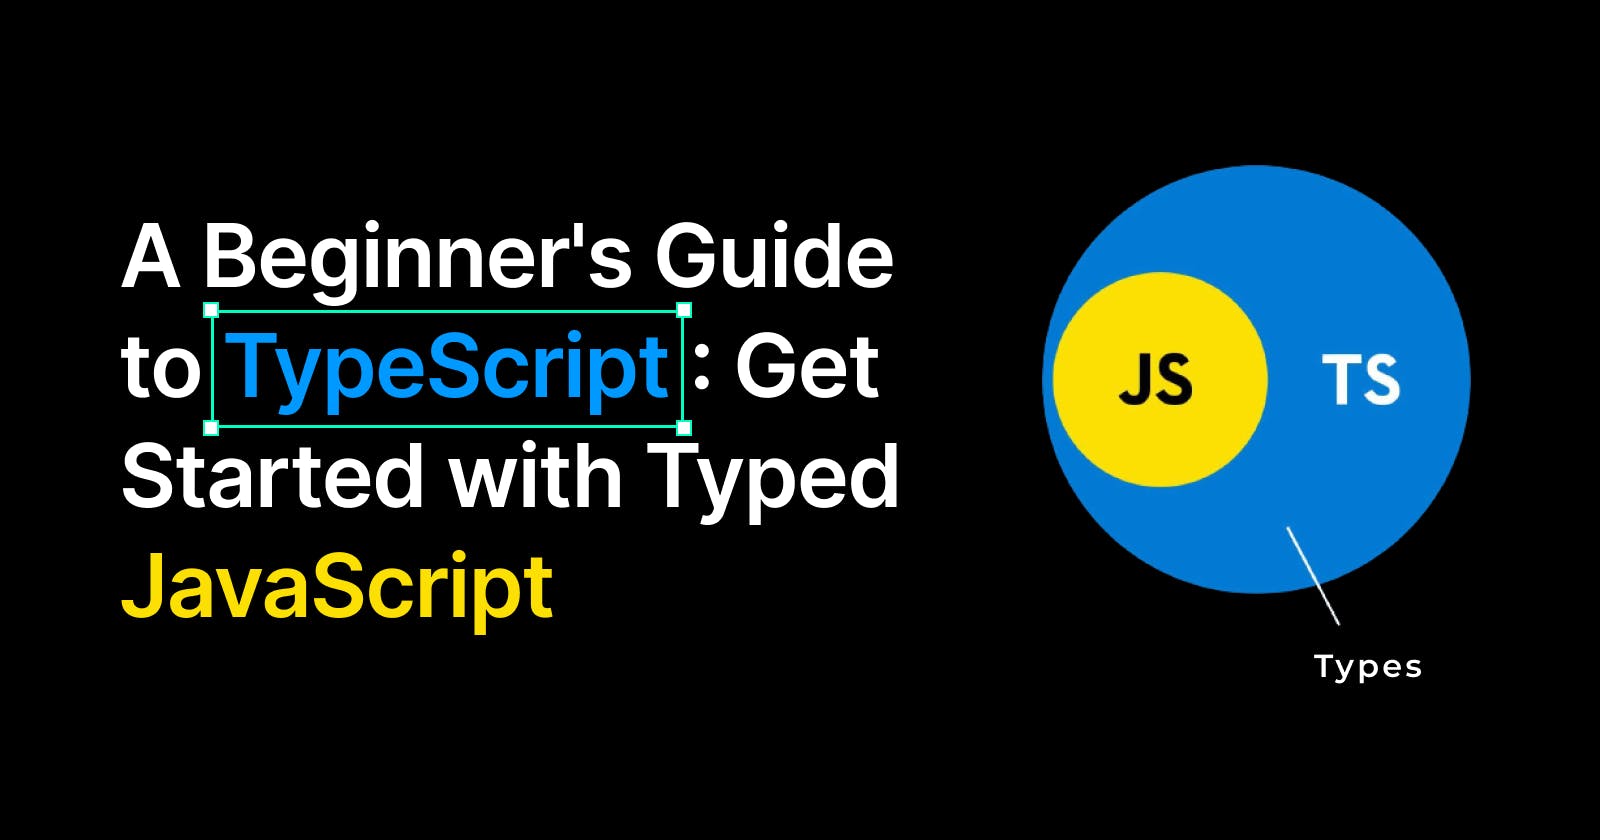 A Beginner's Guide to TypeScript: Getting Started with Strongly Typed JavaScript